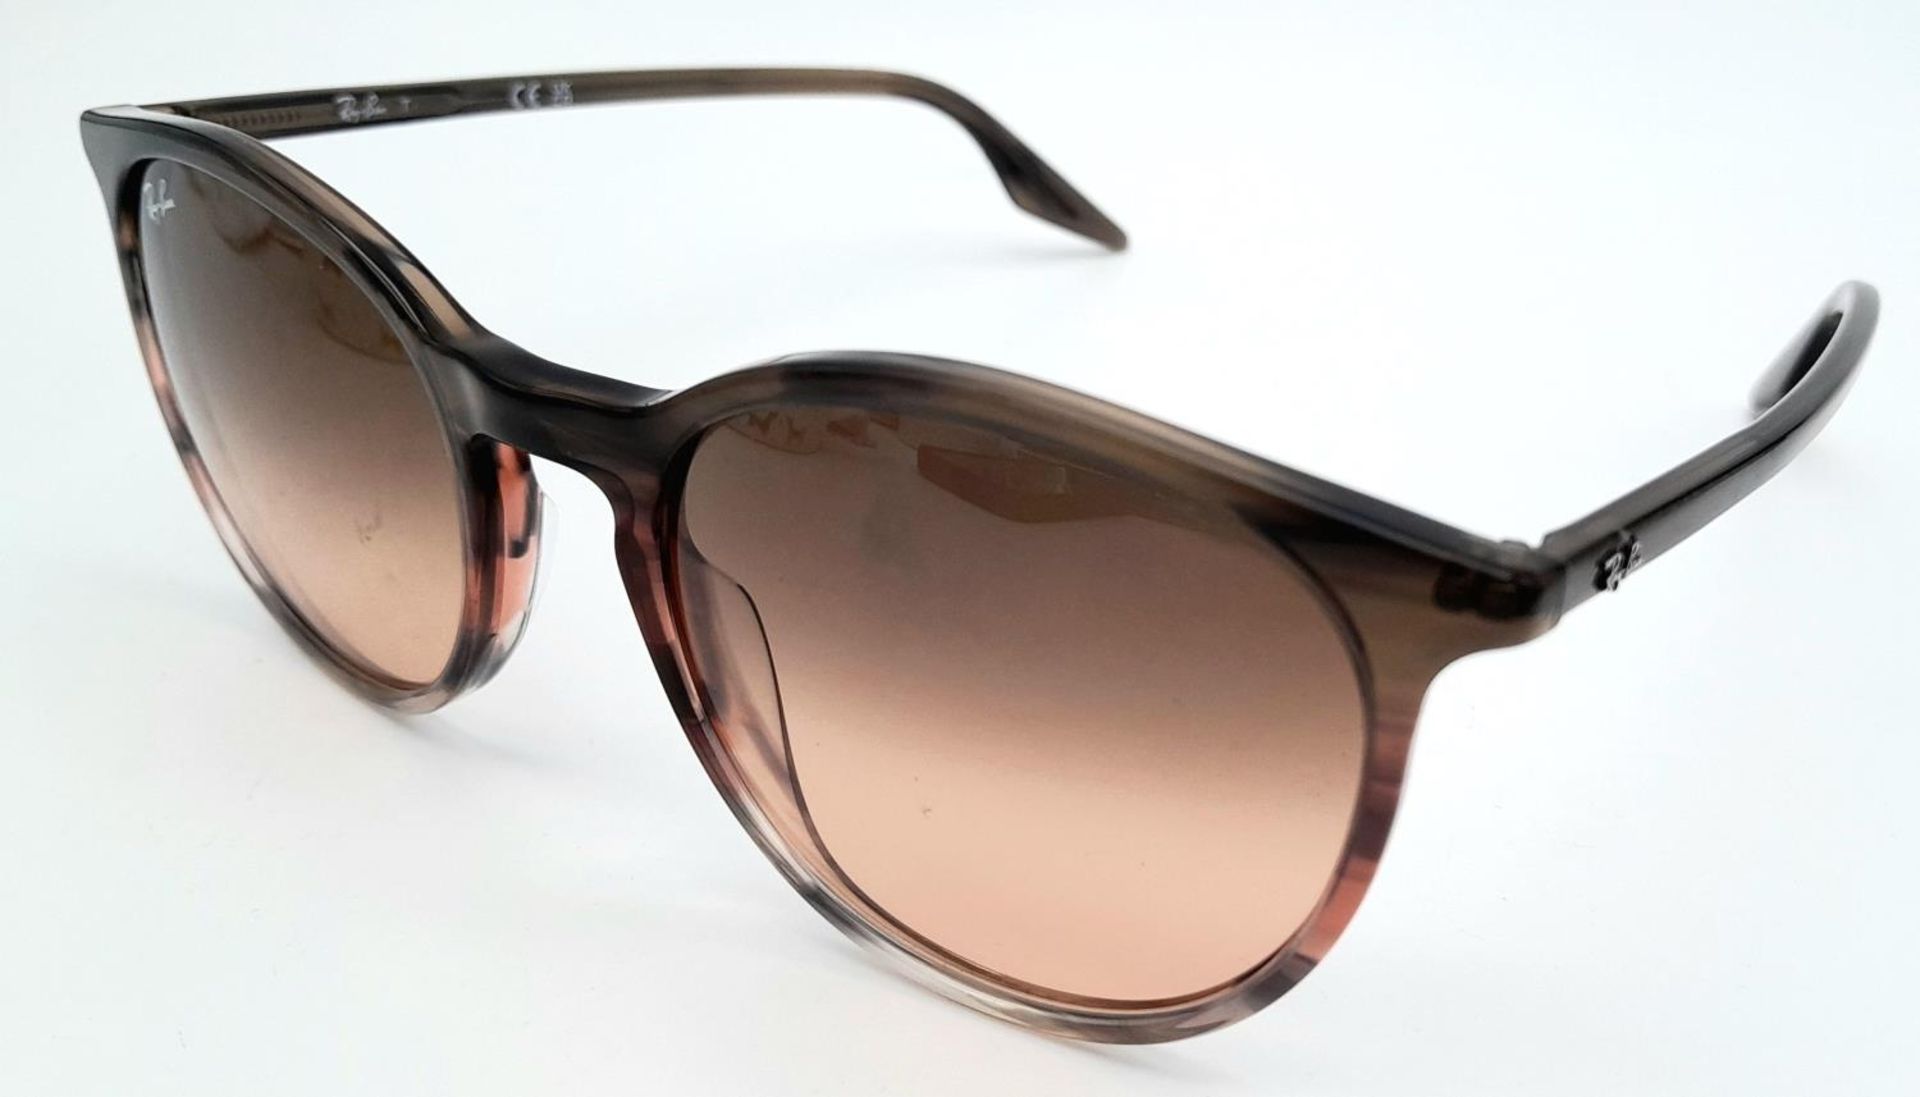 A Pair of Ray-Ban Ladies Sunglasses.